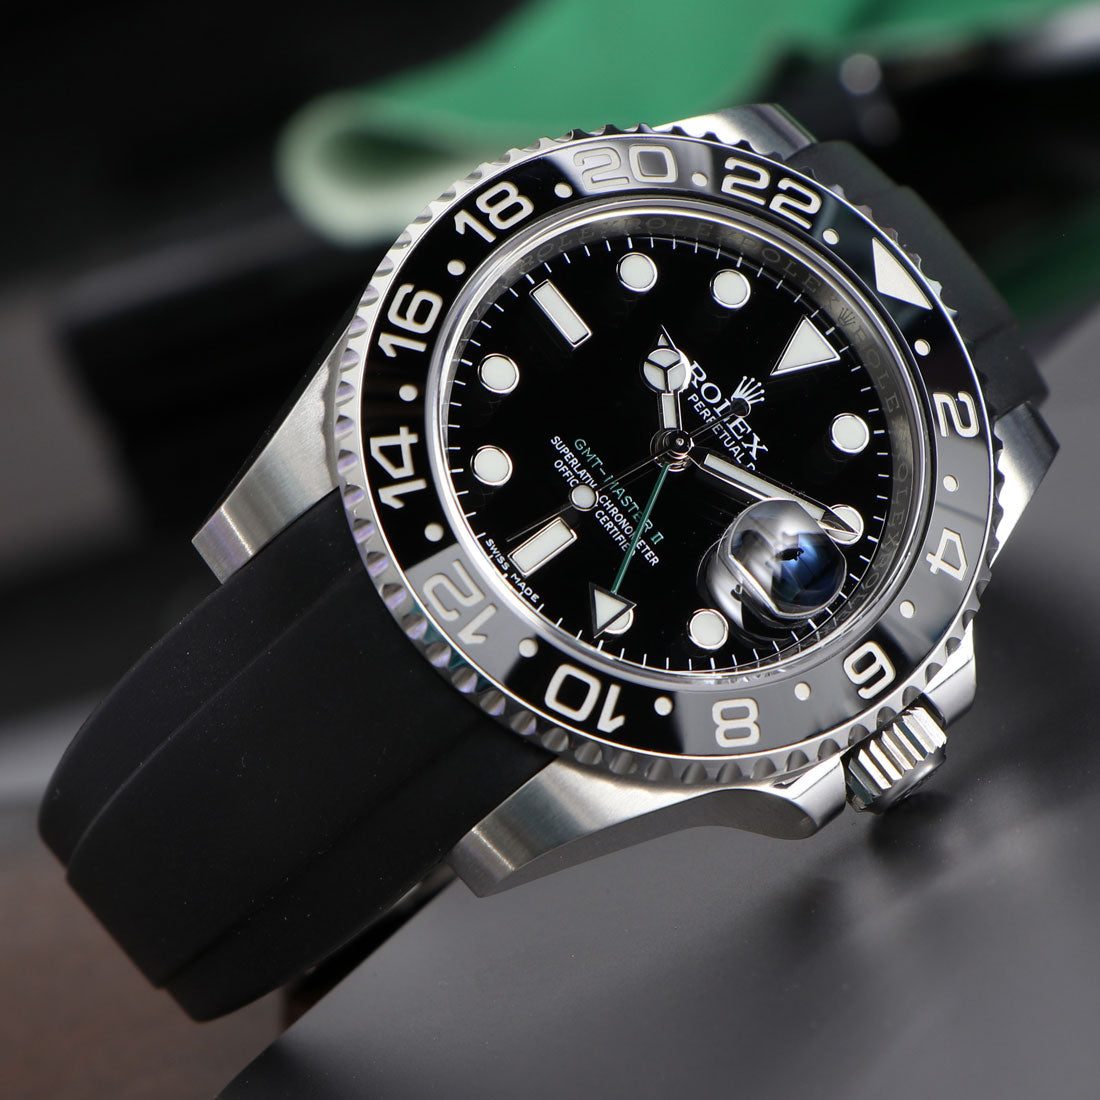 Curved End Rubber Strap on Rolex GMT-Master II